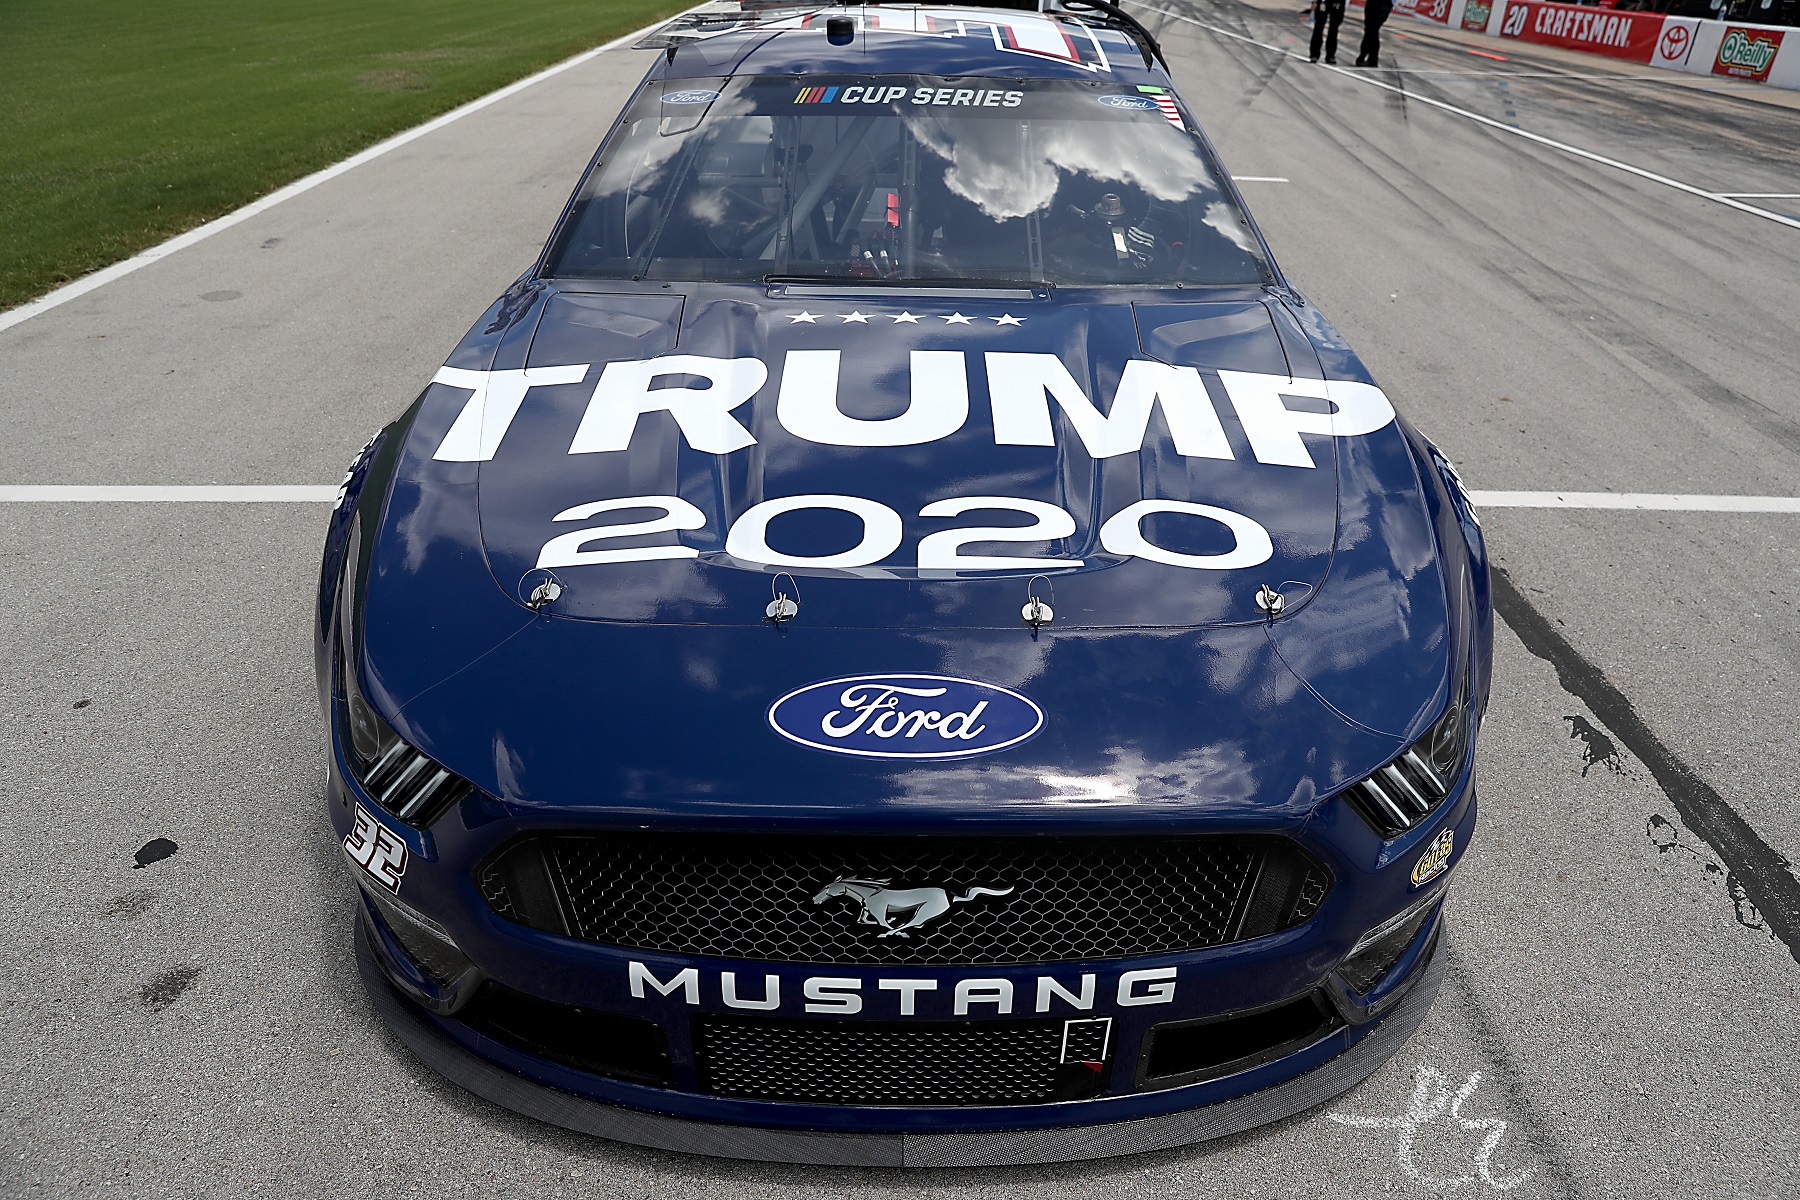 Trump 2020 NASCAR Team Will Continue to Race on Goodyear Tires